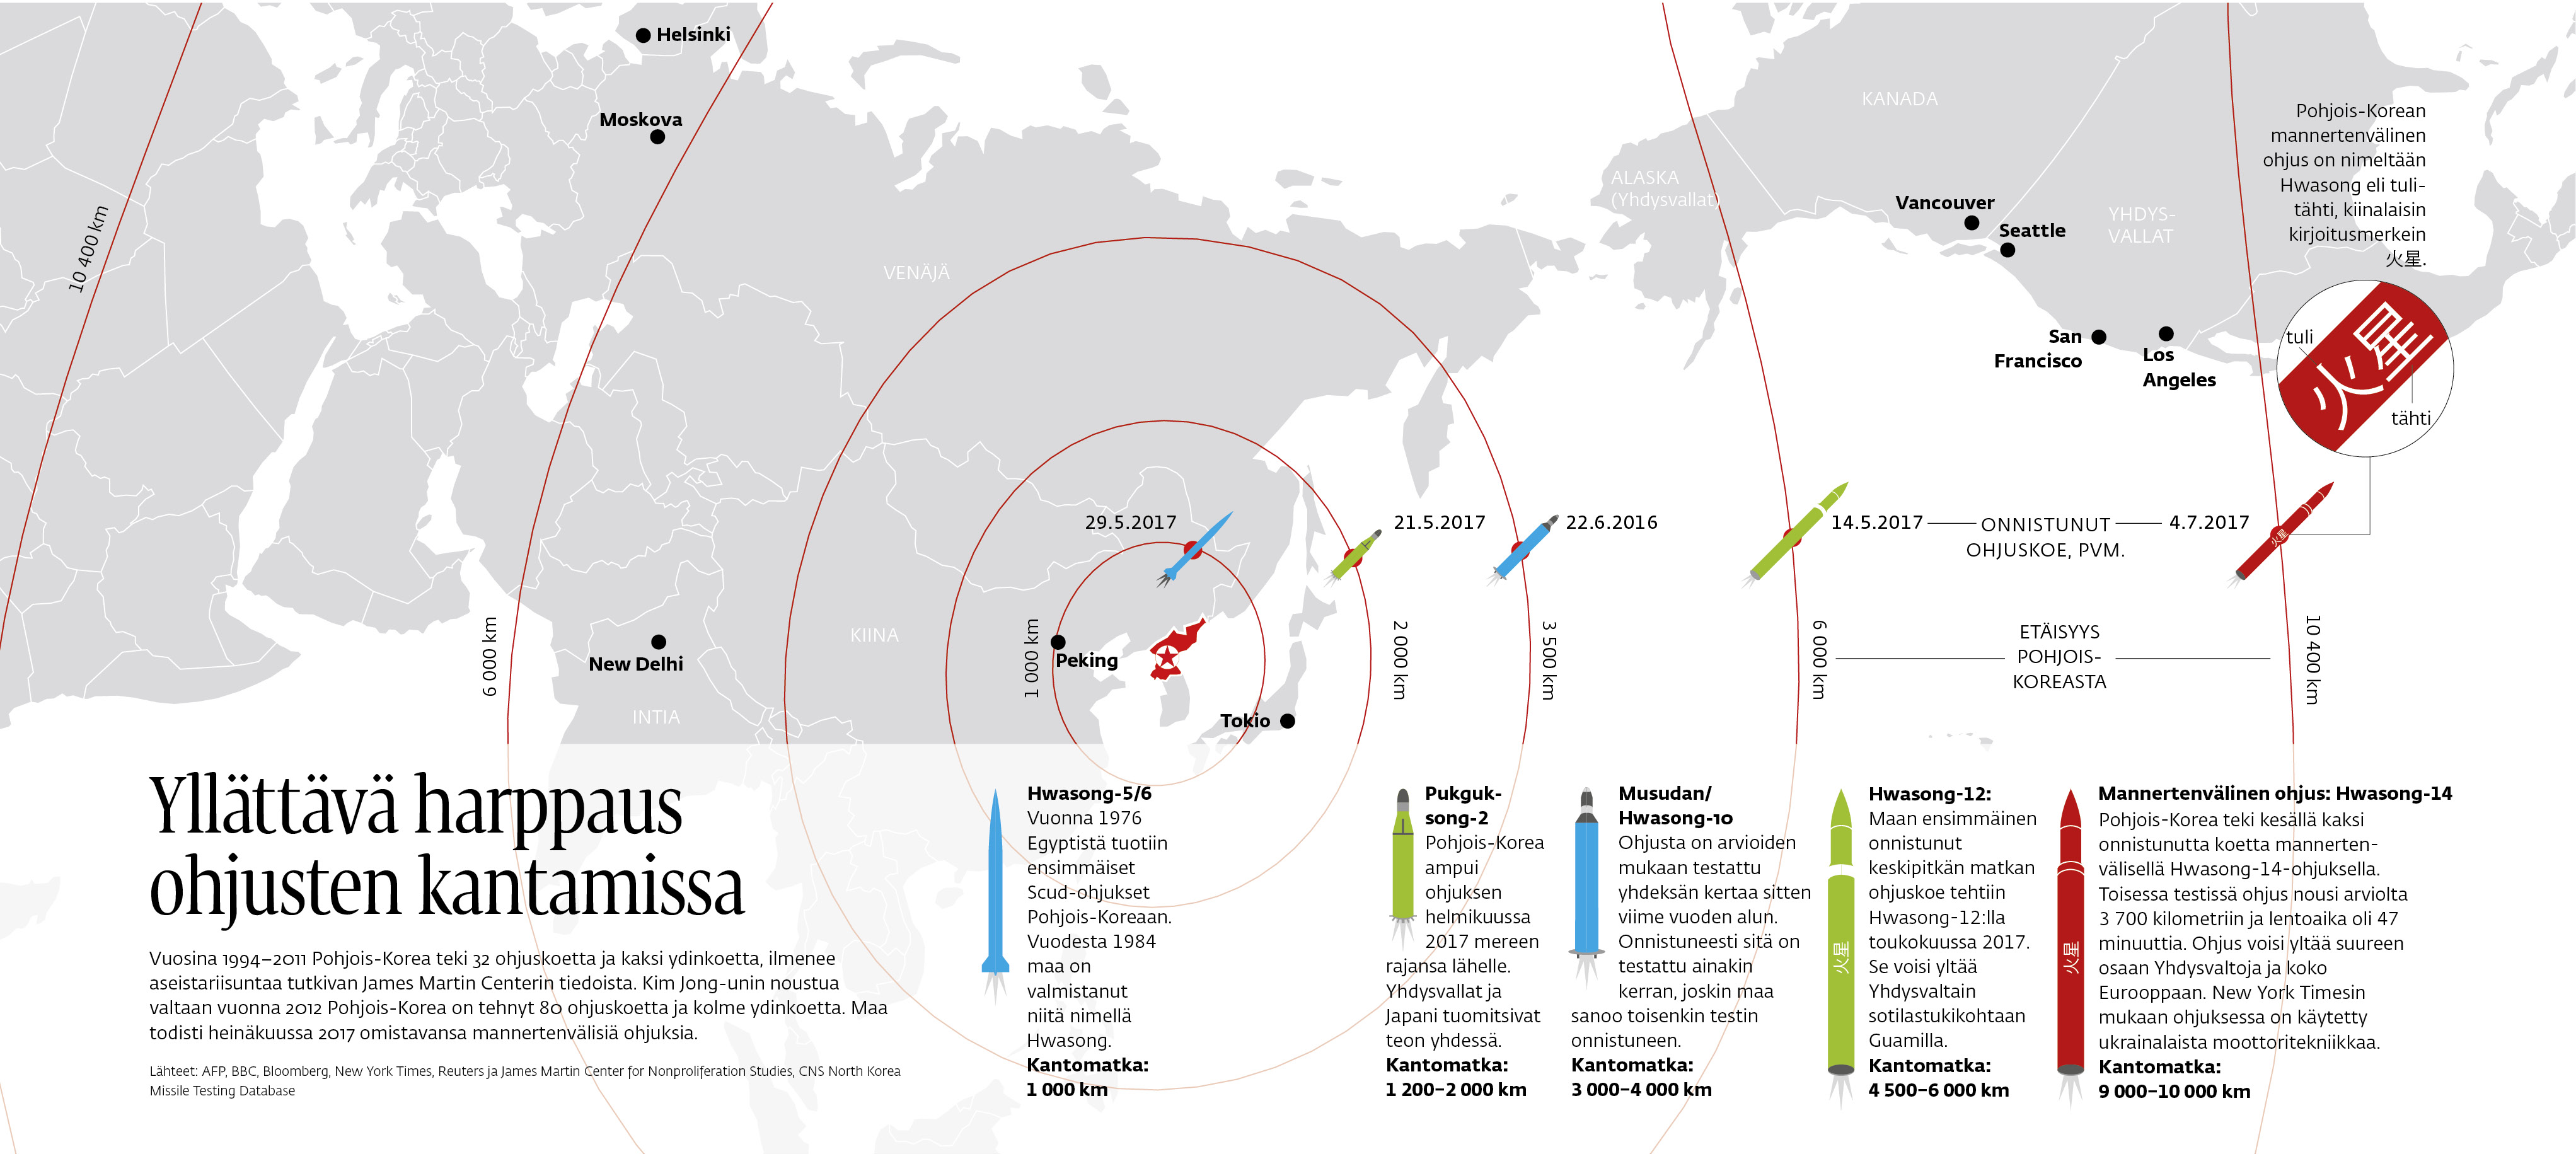 A map infographic on North Korean missile ranges, published in the Ulkopolitiikka magazine.